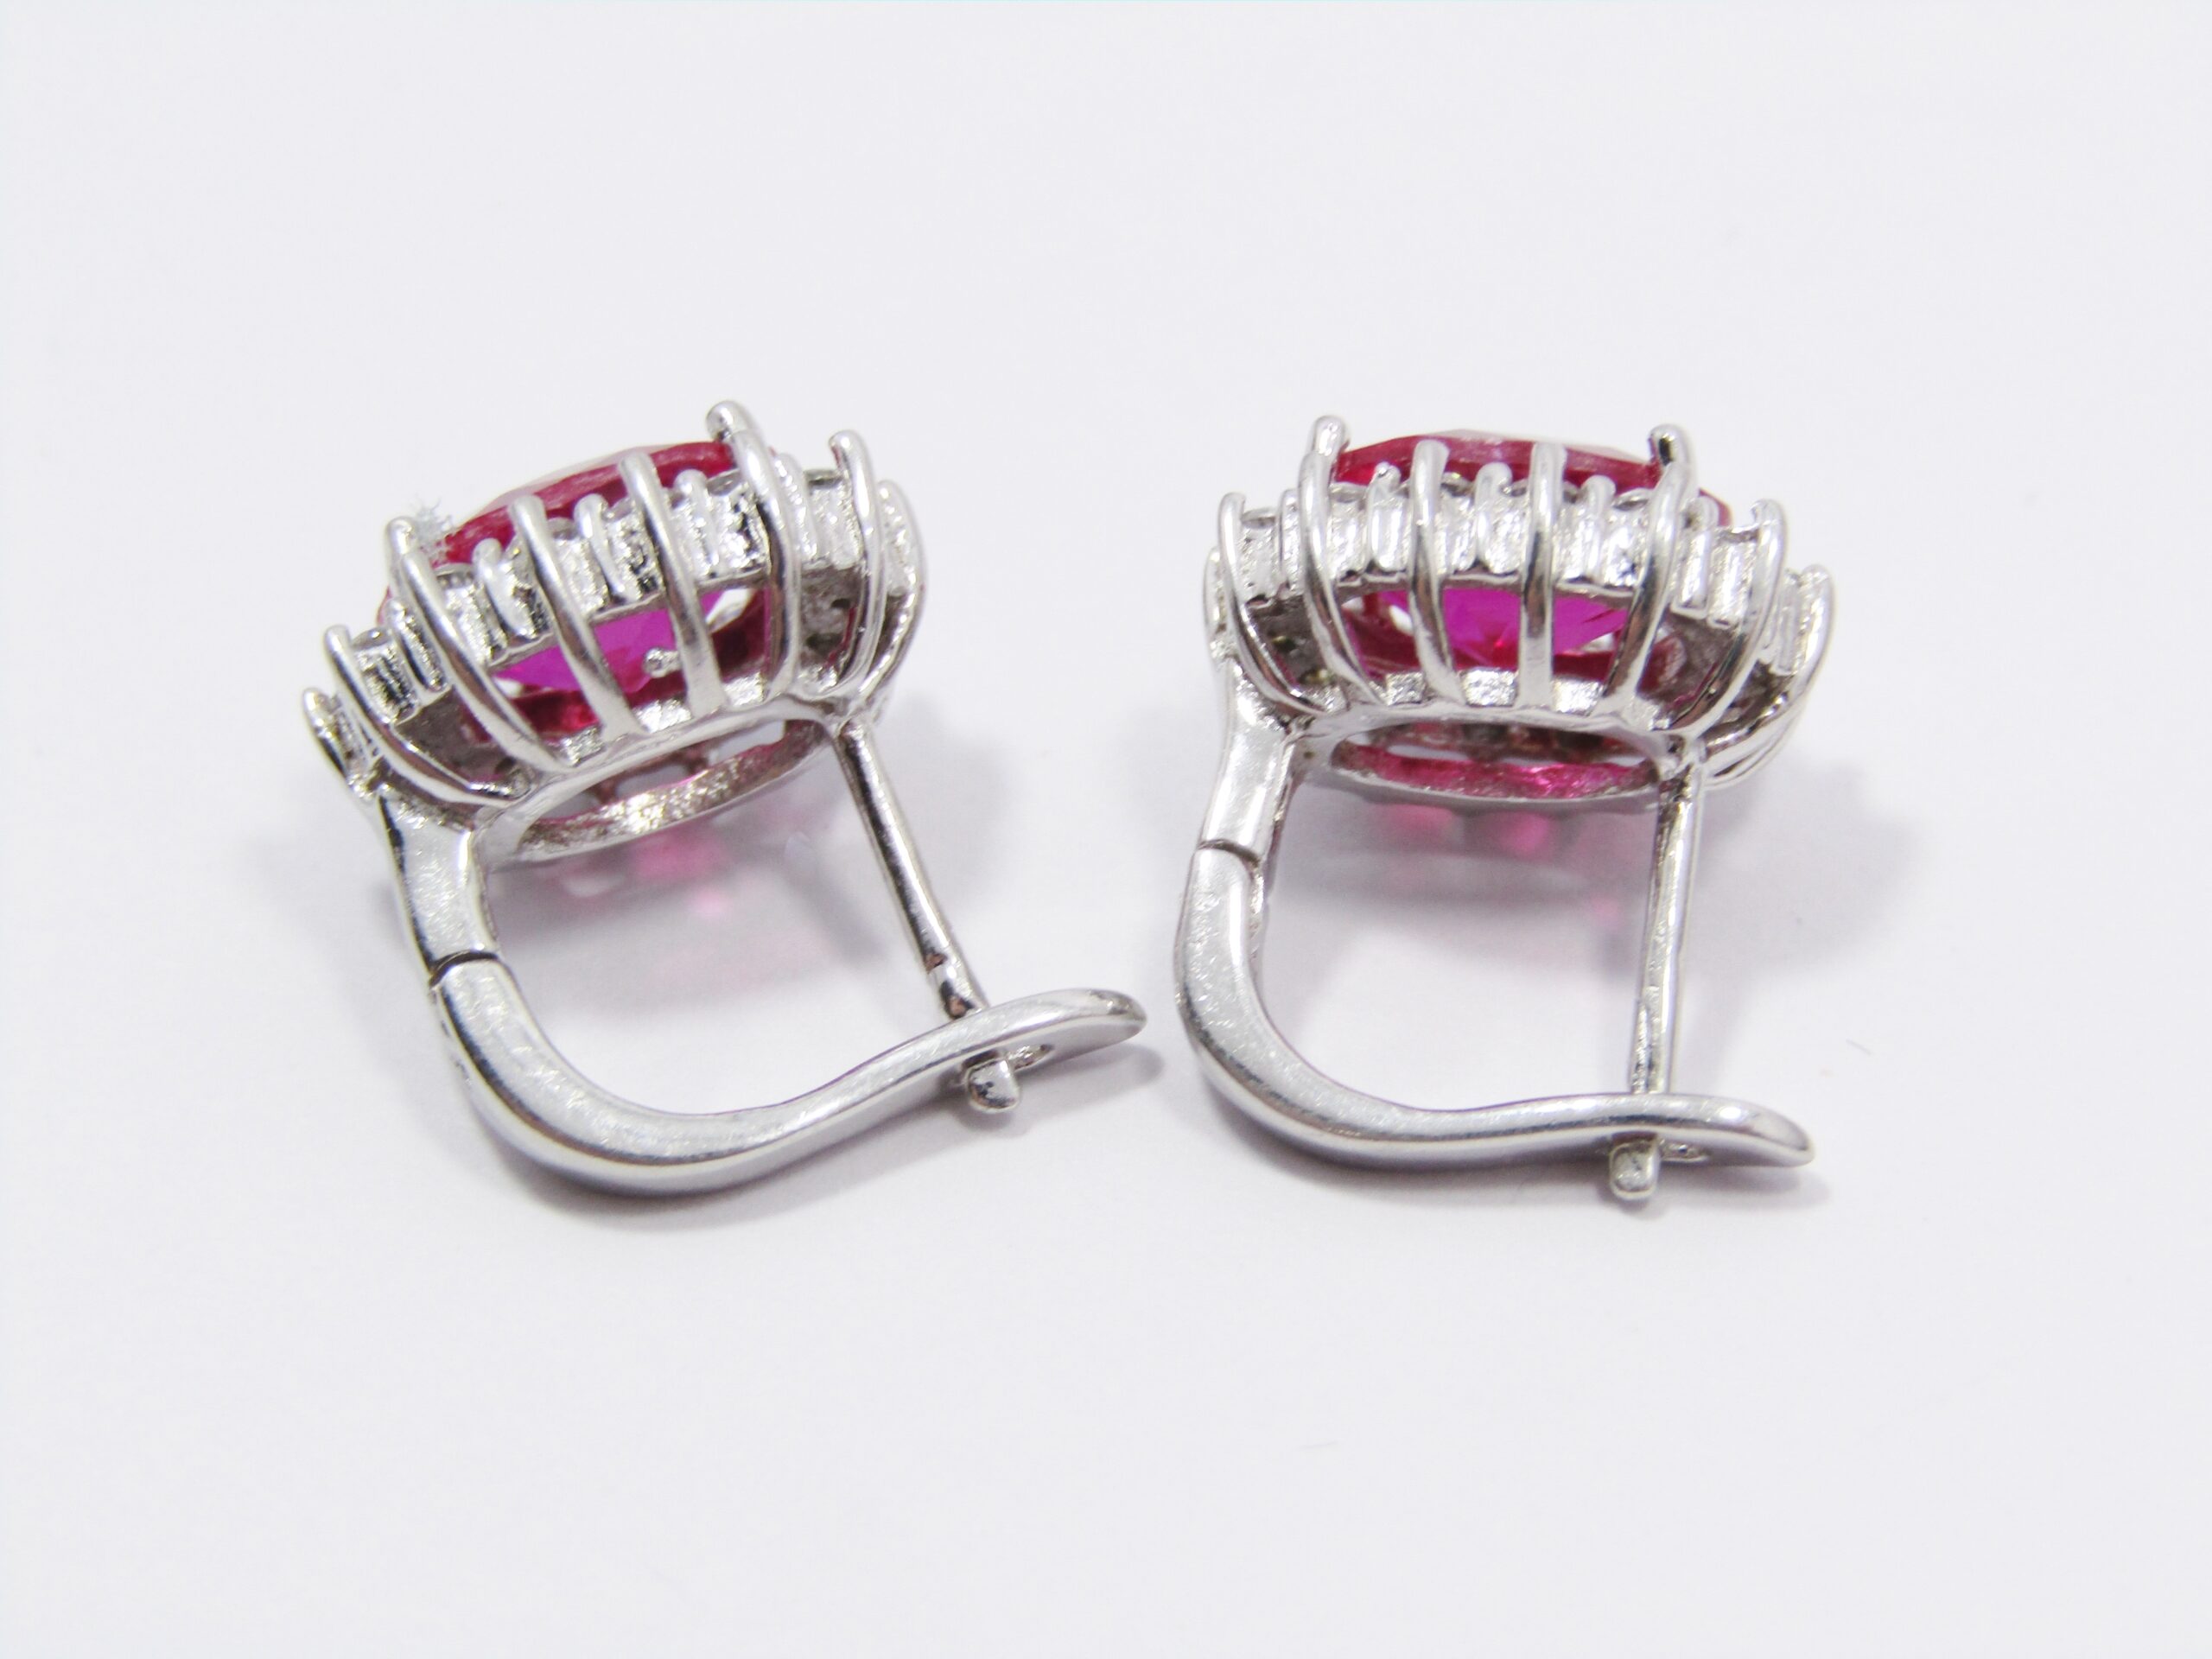 A Gorgeous Pair of Vivid Pink Halo Design Earrings in Sterling Silver